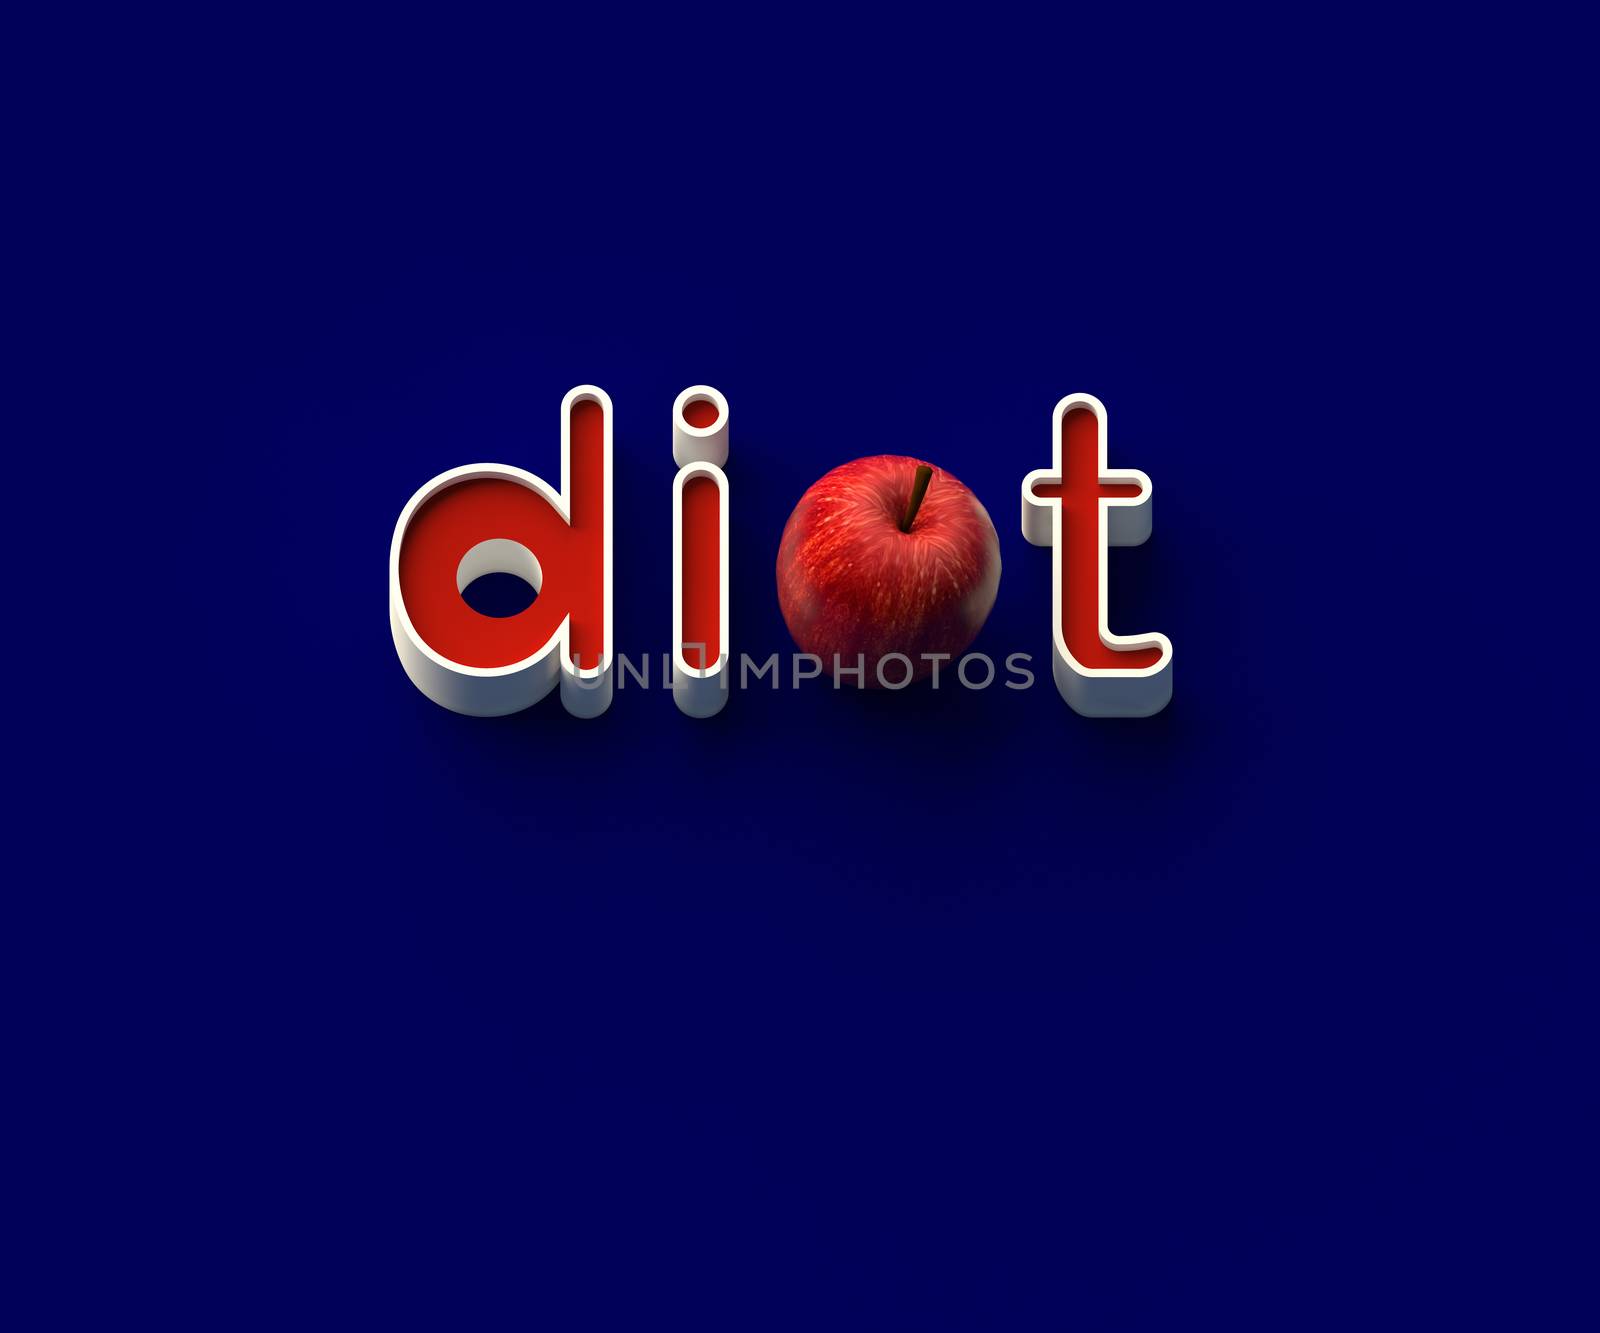 3D RENDERING OF WORDS 'di', AN APPLE AND 't' by PrettyTG